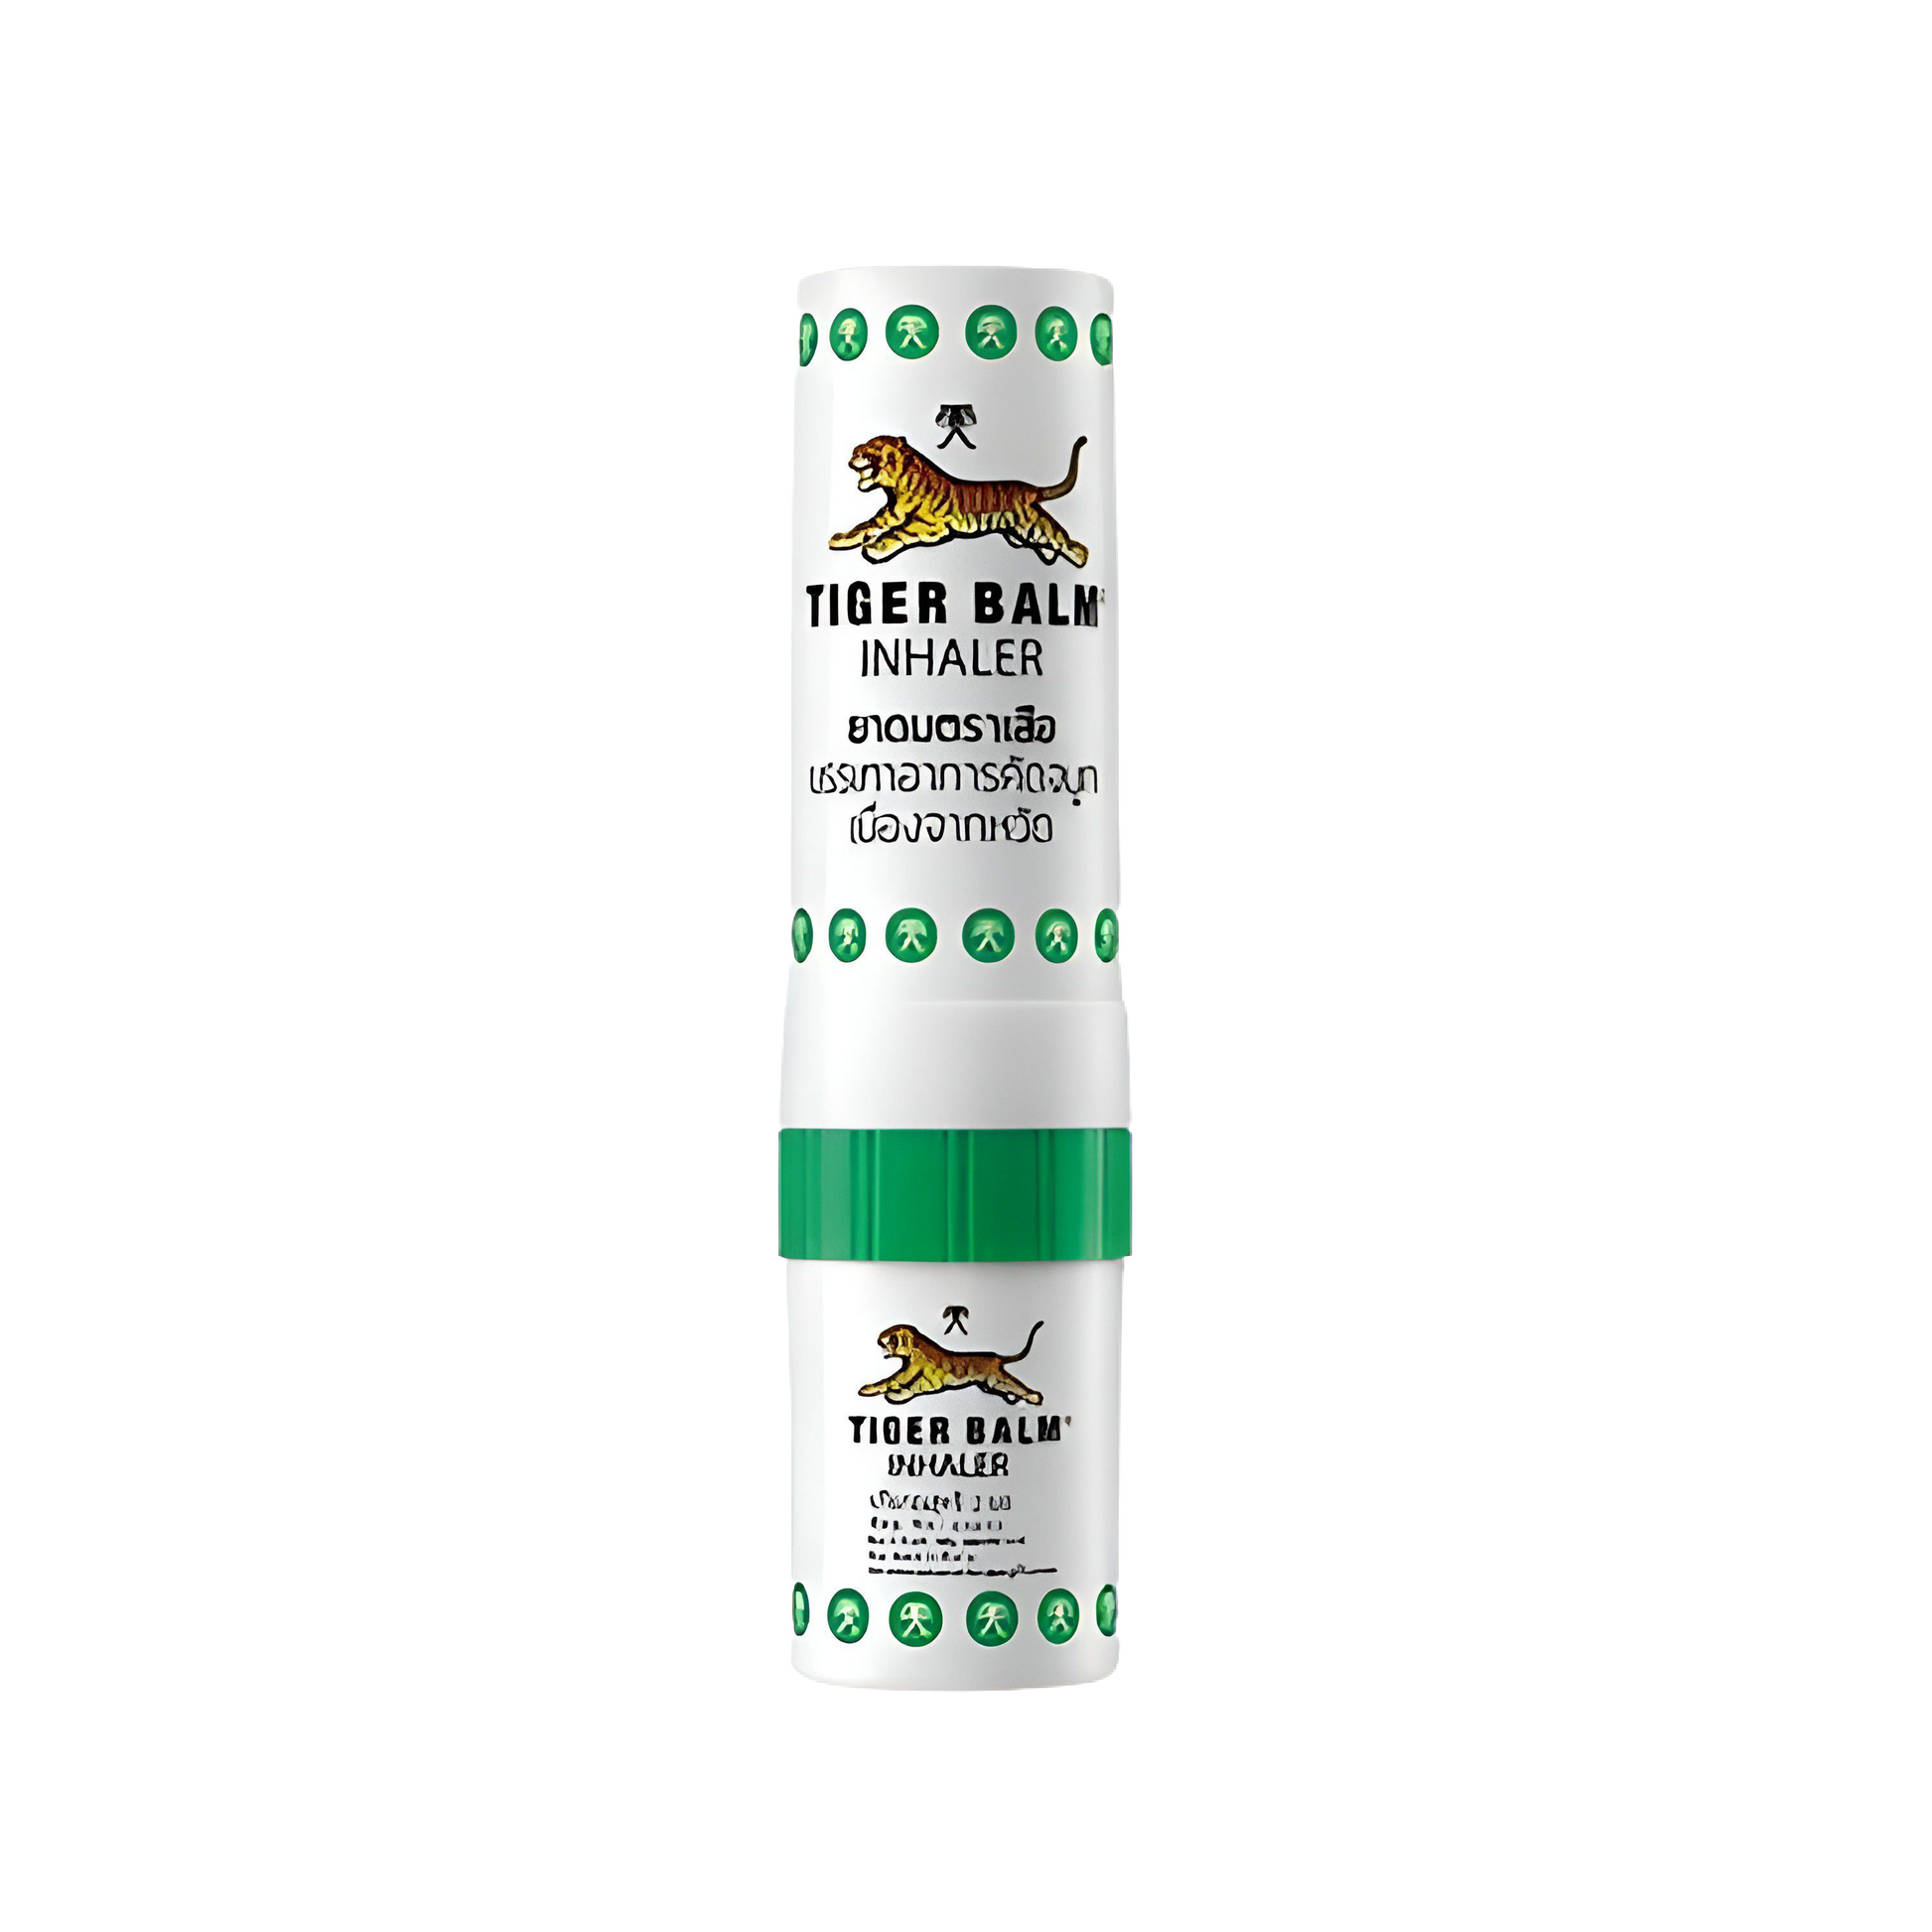 Tiger Balm Nasal Inhalers - Refreshing and Revitalizing Aromatherapy - ArtisanThai.com - Your Premier Crafts & Tapee Tea Supplier